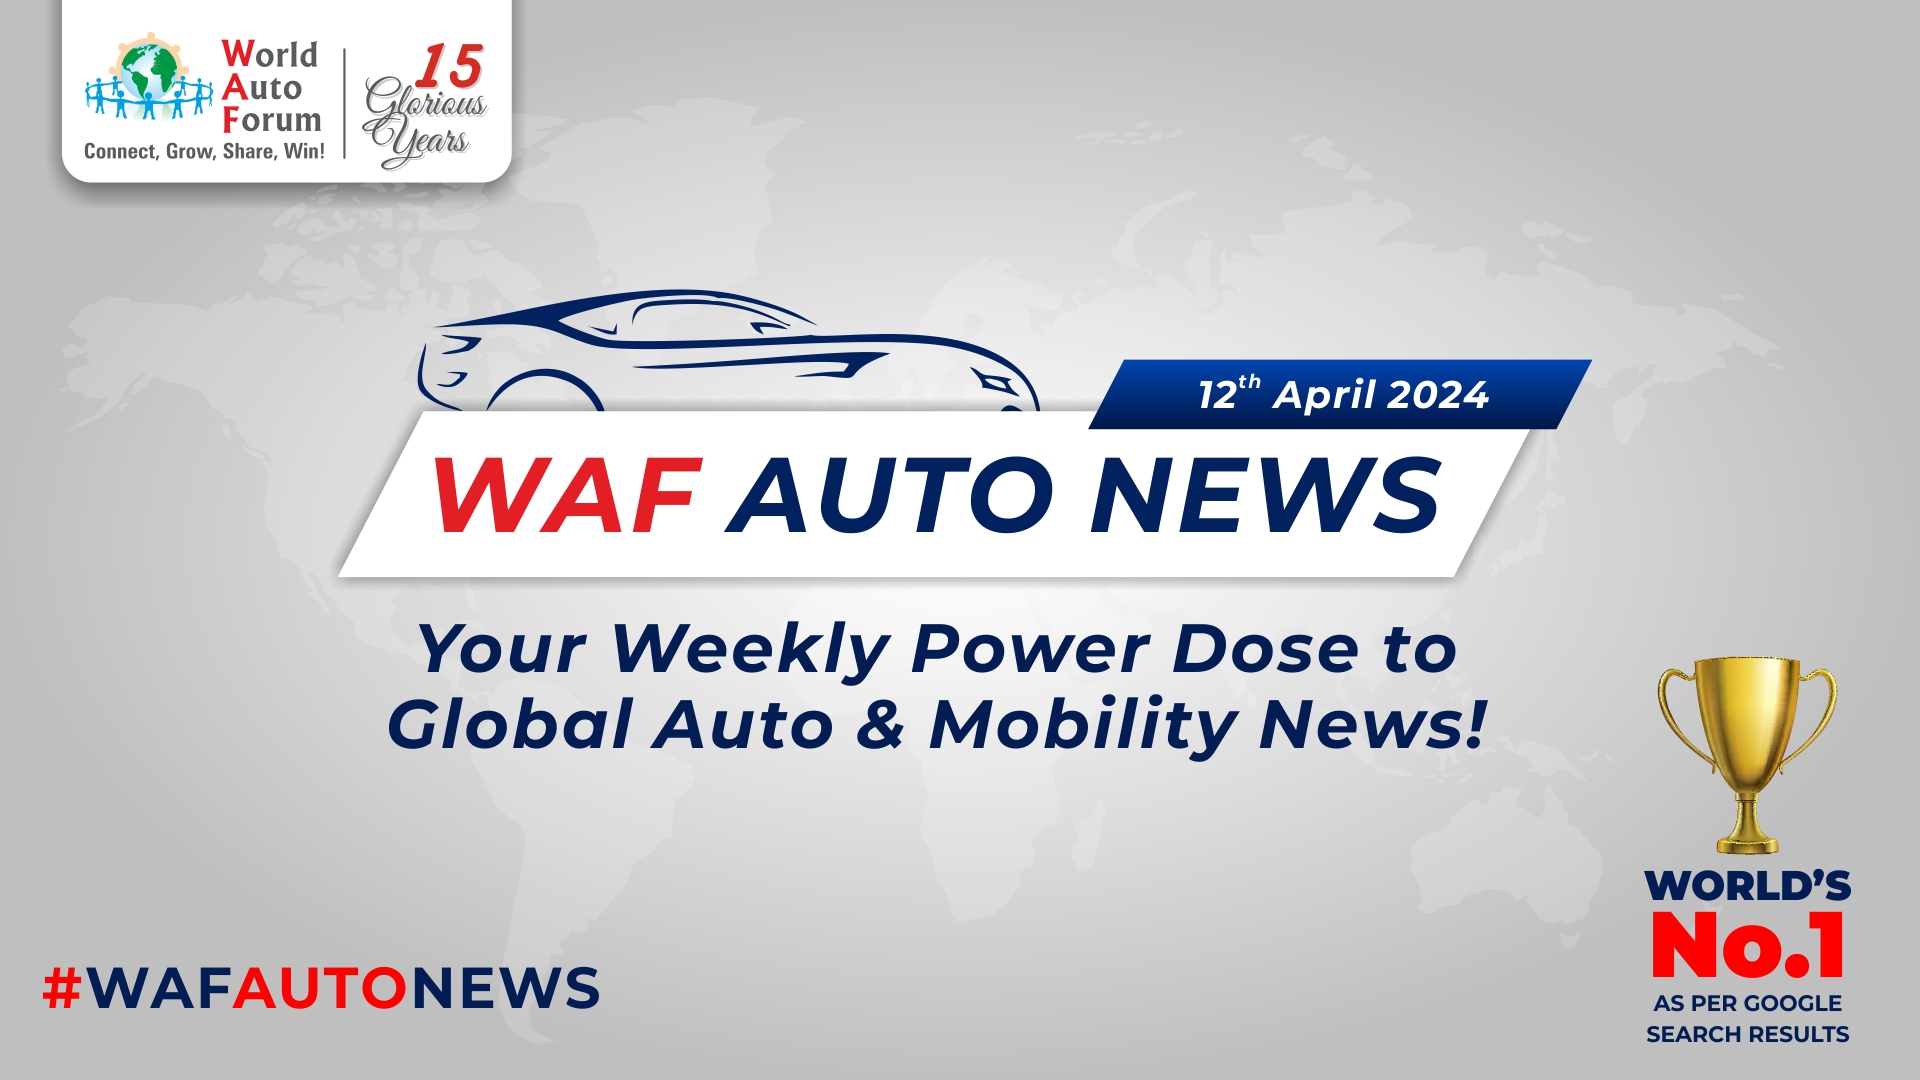 WAF Auto News | The Auto World This Week (12th April 2024) | World Auto Forum